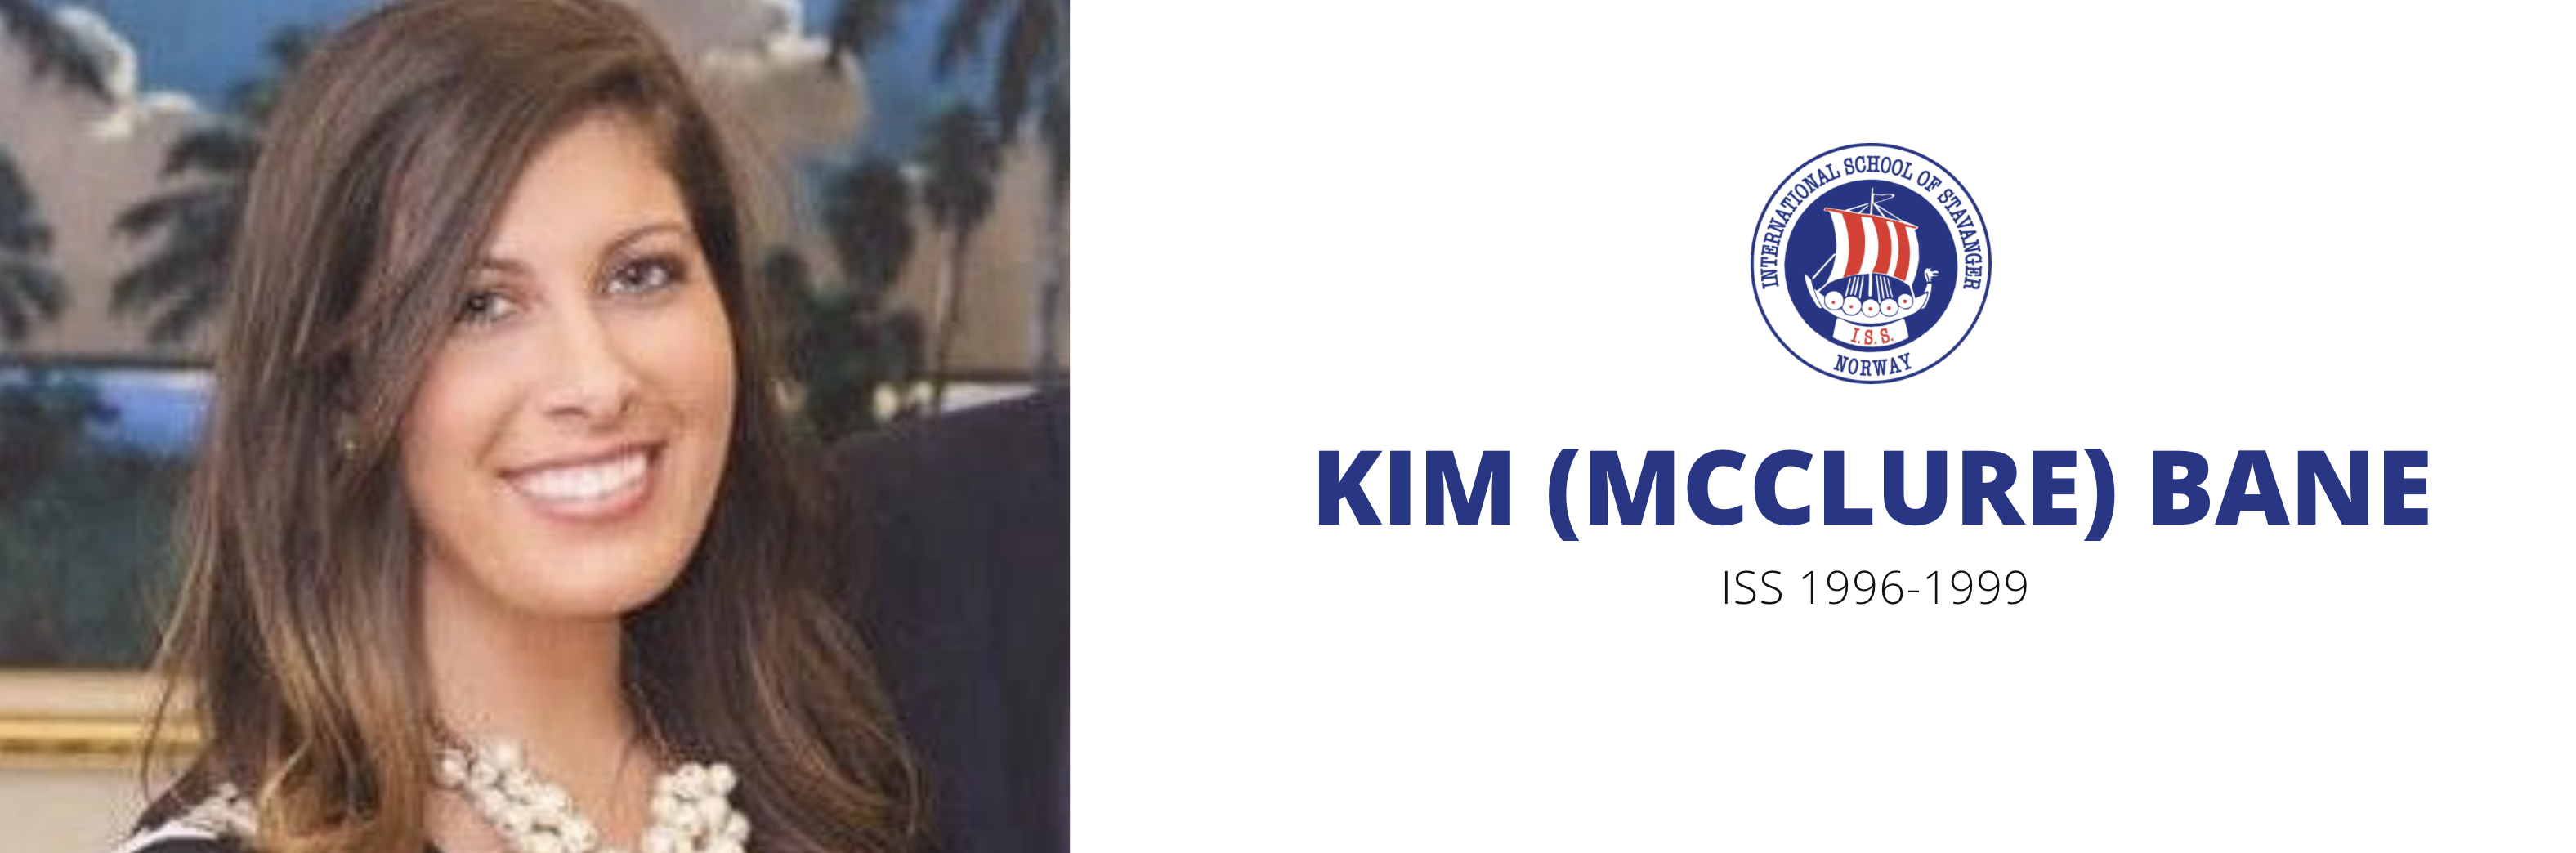 You are currently viewing Alumni Spotlight: Kim (McClure) Bane (1996-1999)